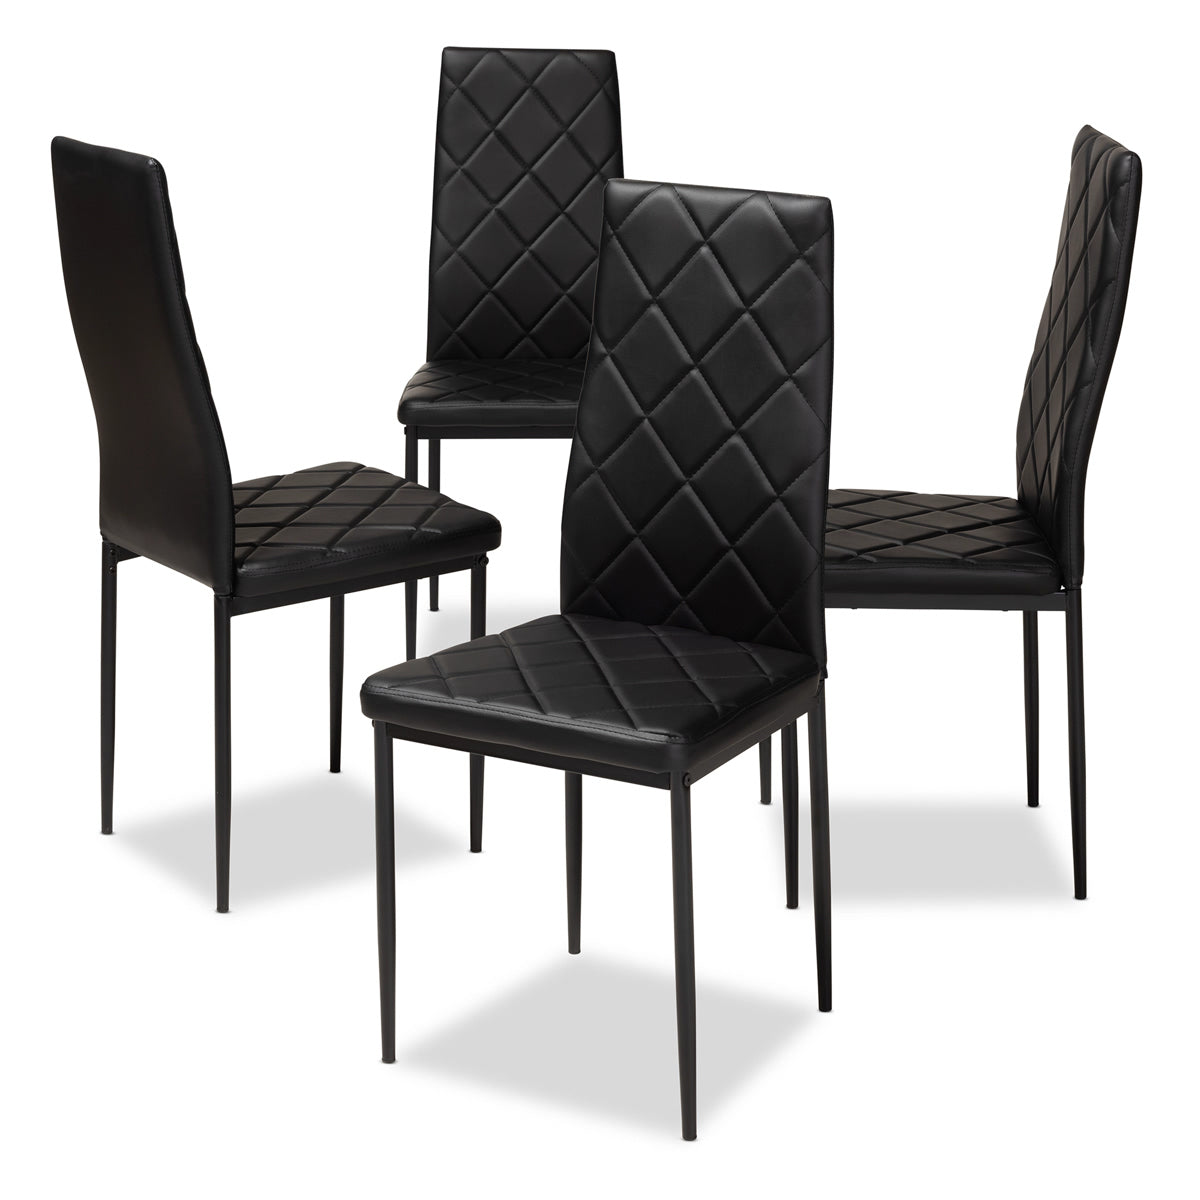 Baxton Studio Blaise Modern and Contemporary Black Faux Leather Upholstered Dining Chair (Set of 4) Baxton Studio-dining chair-Minimal And Modern - 1